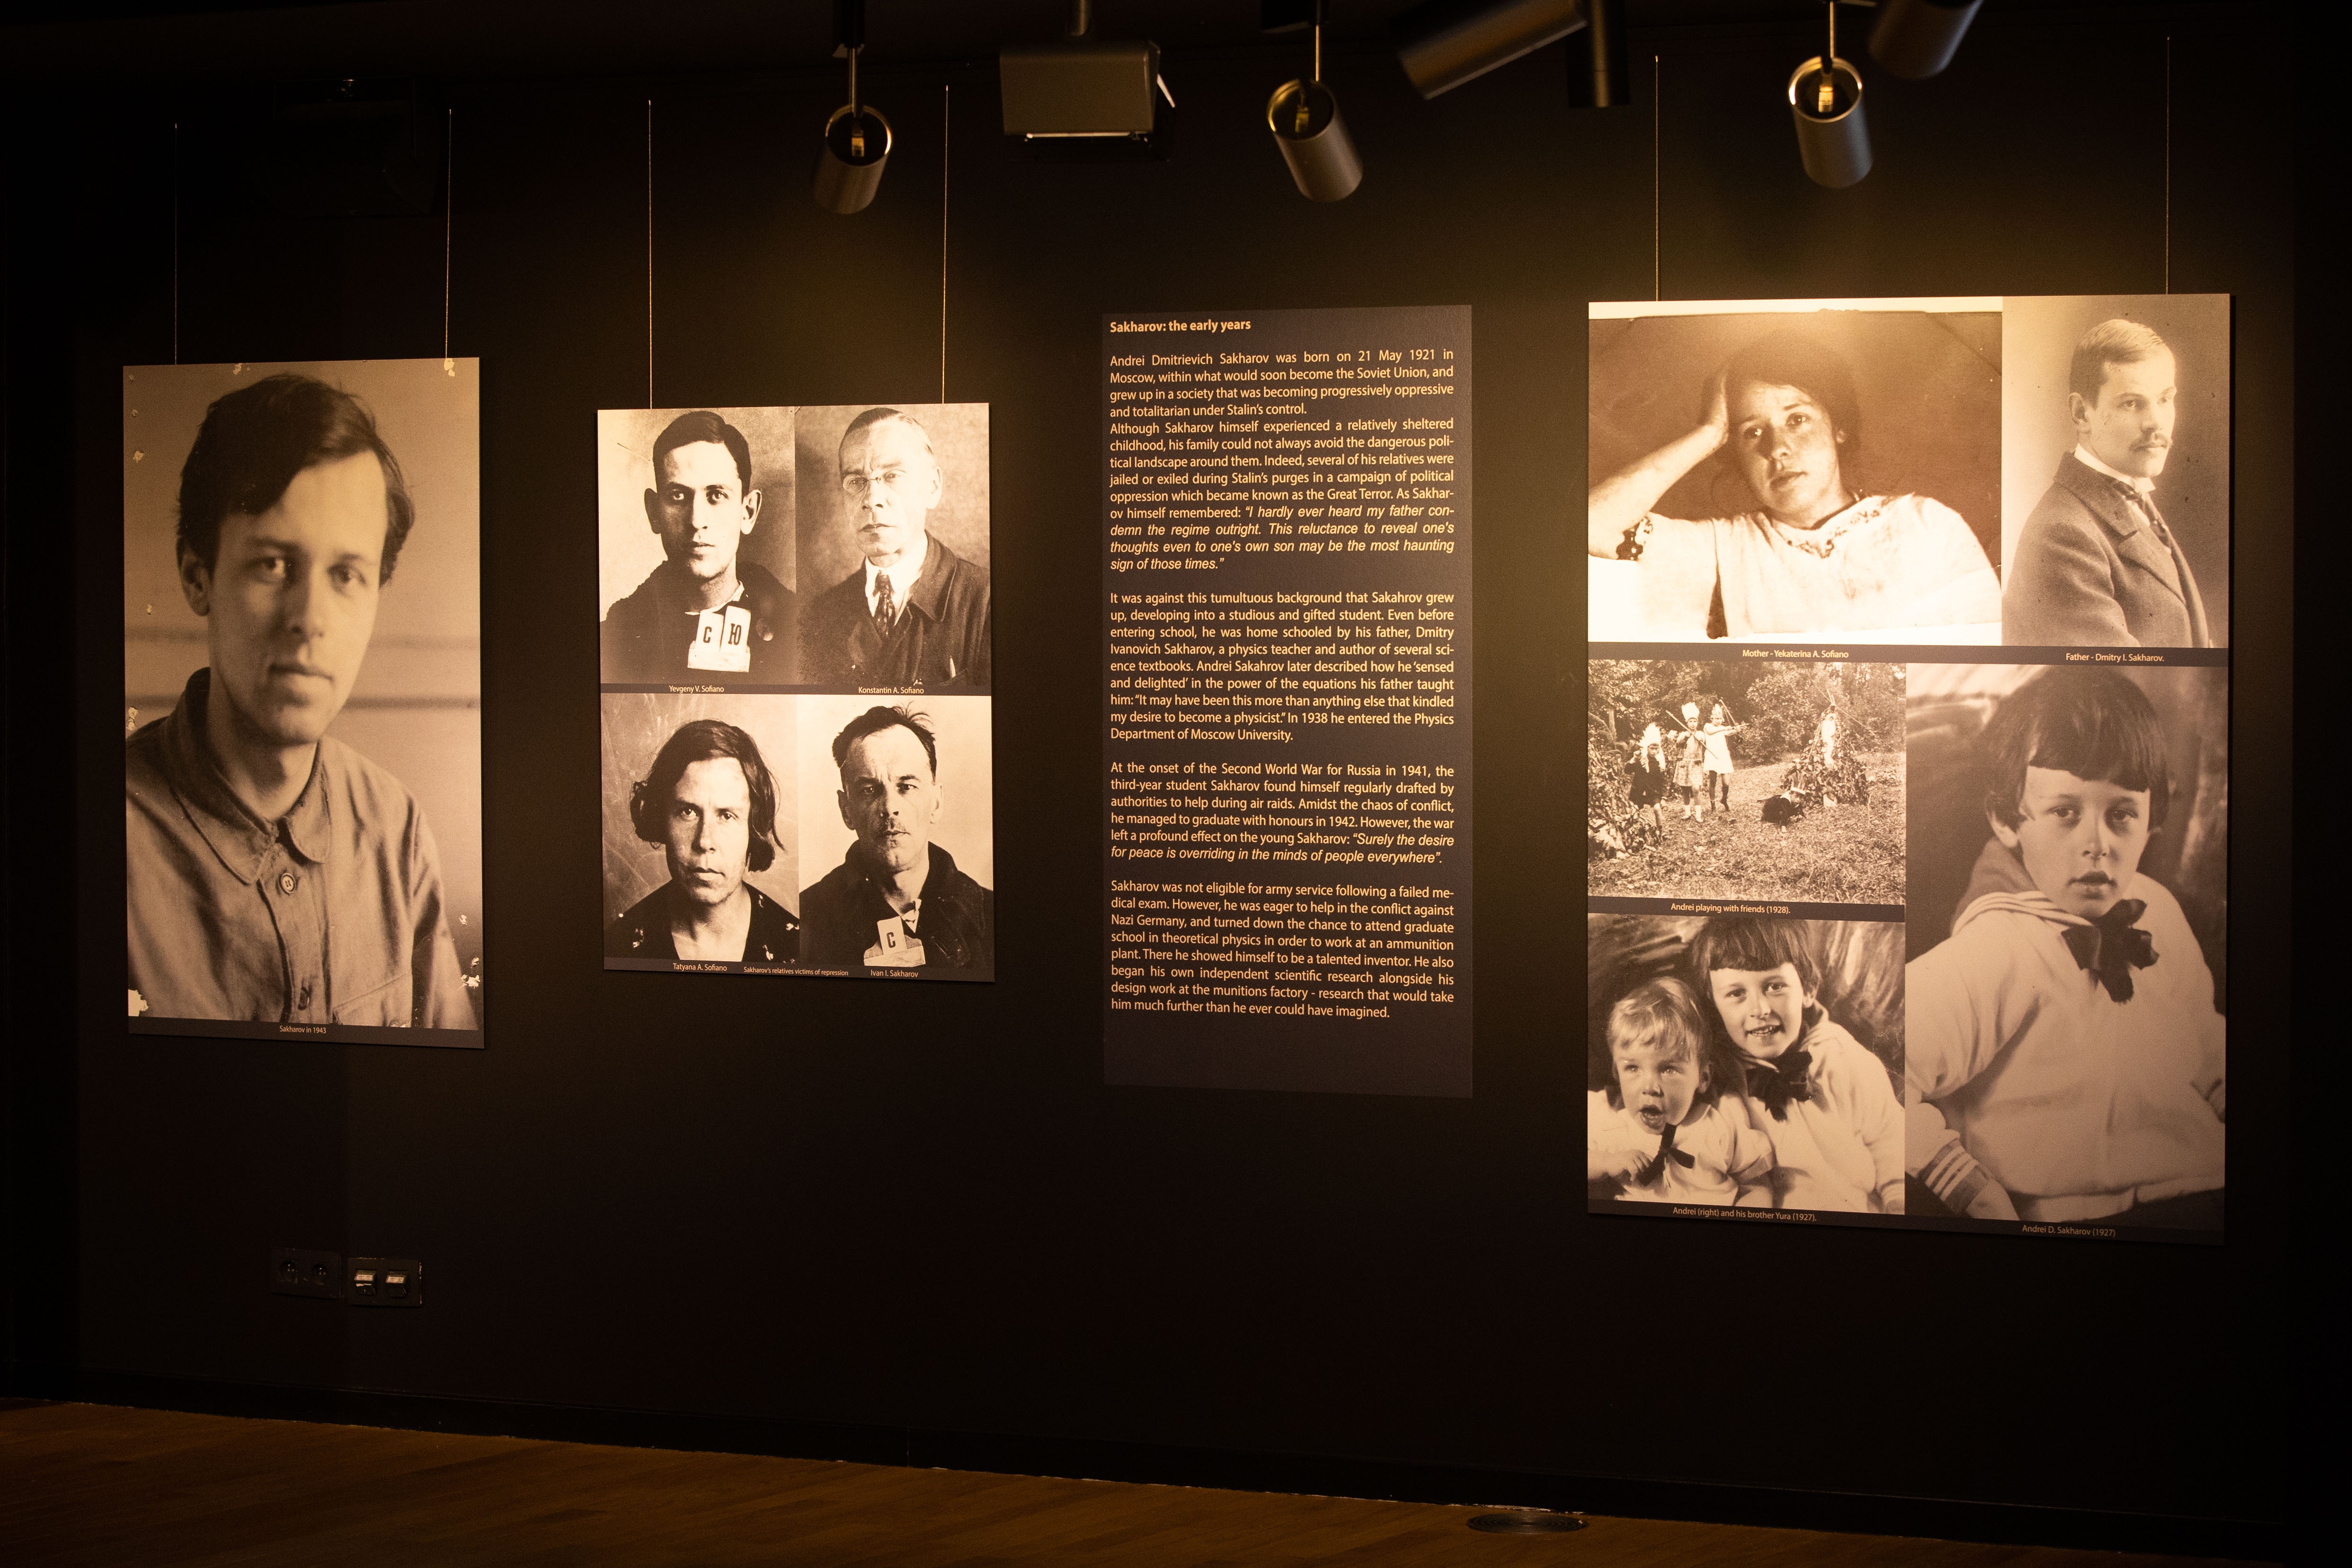 Temporary exhibition on Sakharov by the House of European History